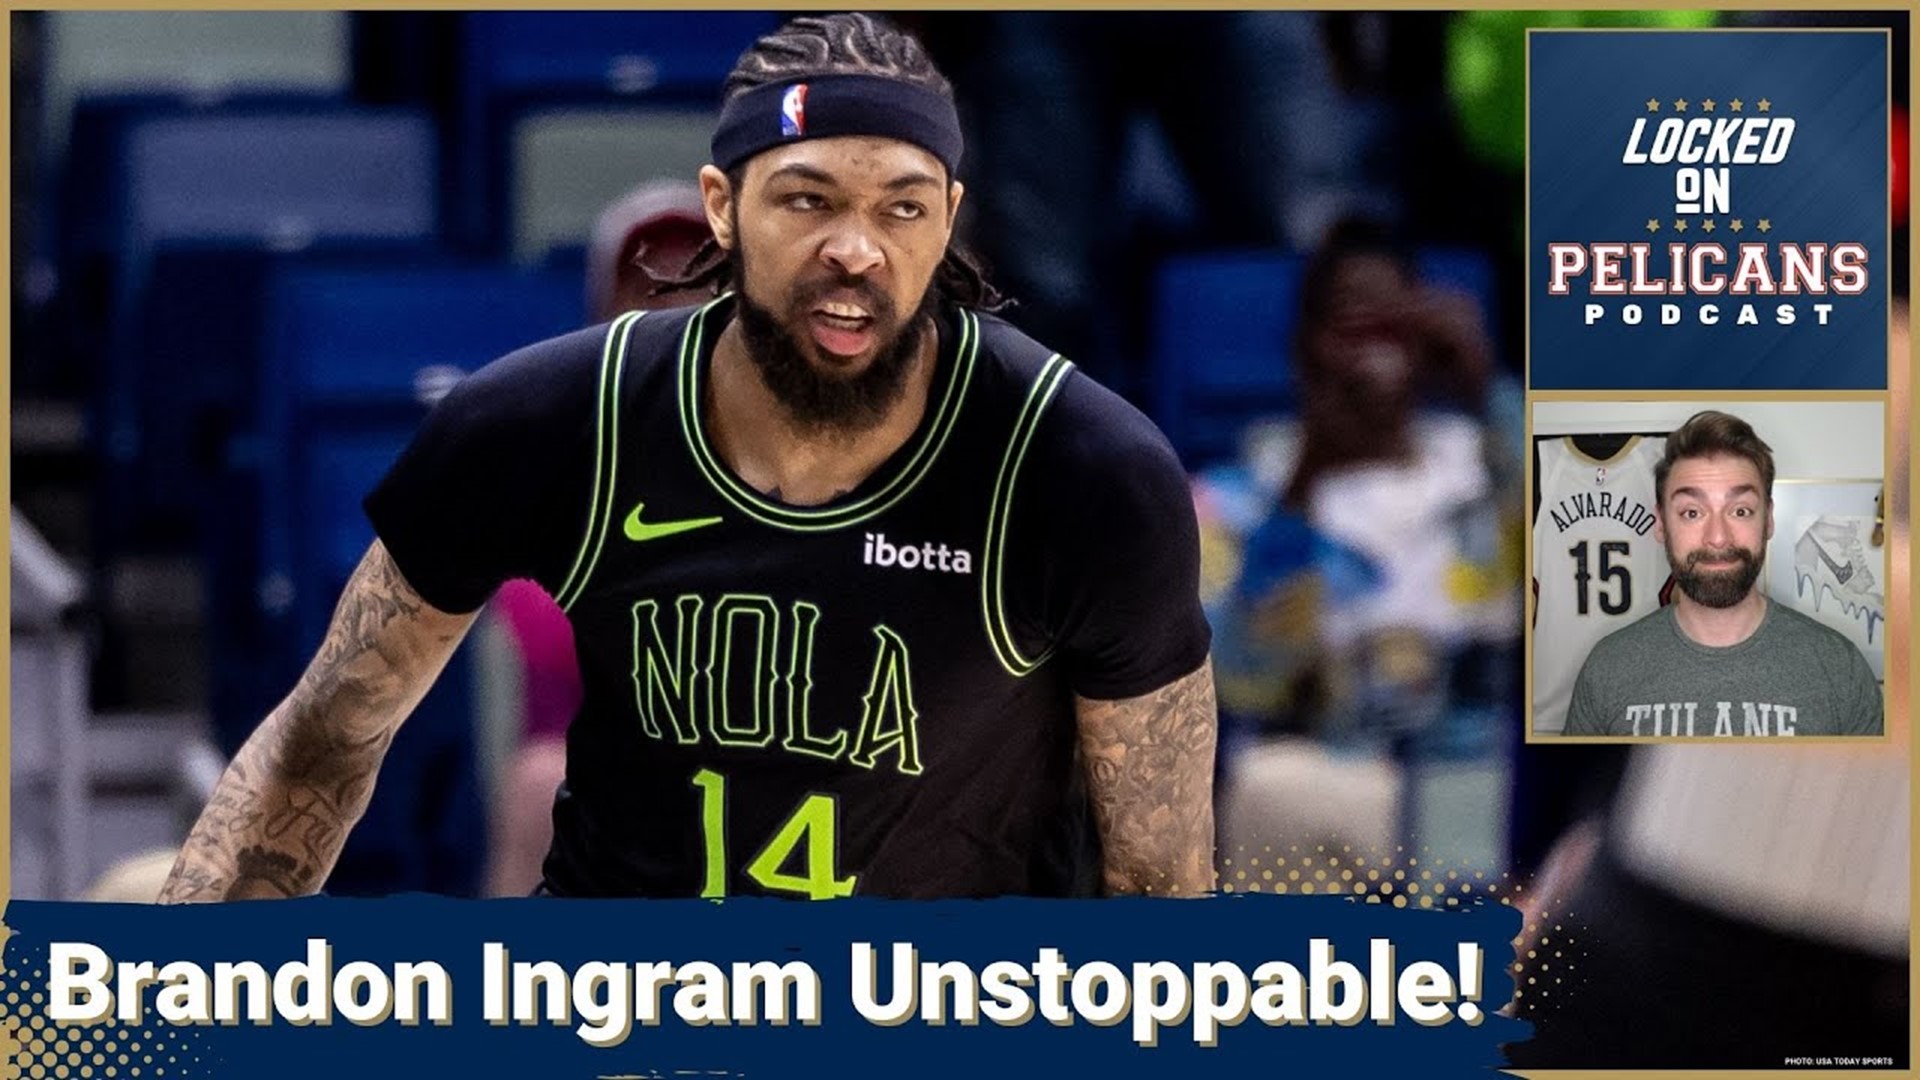 Brandon Ingram was basically unstoppable against the Indiana Pacers as the New Orleans Pelicans got a massive win.